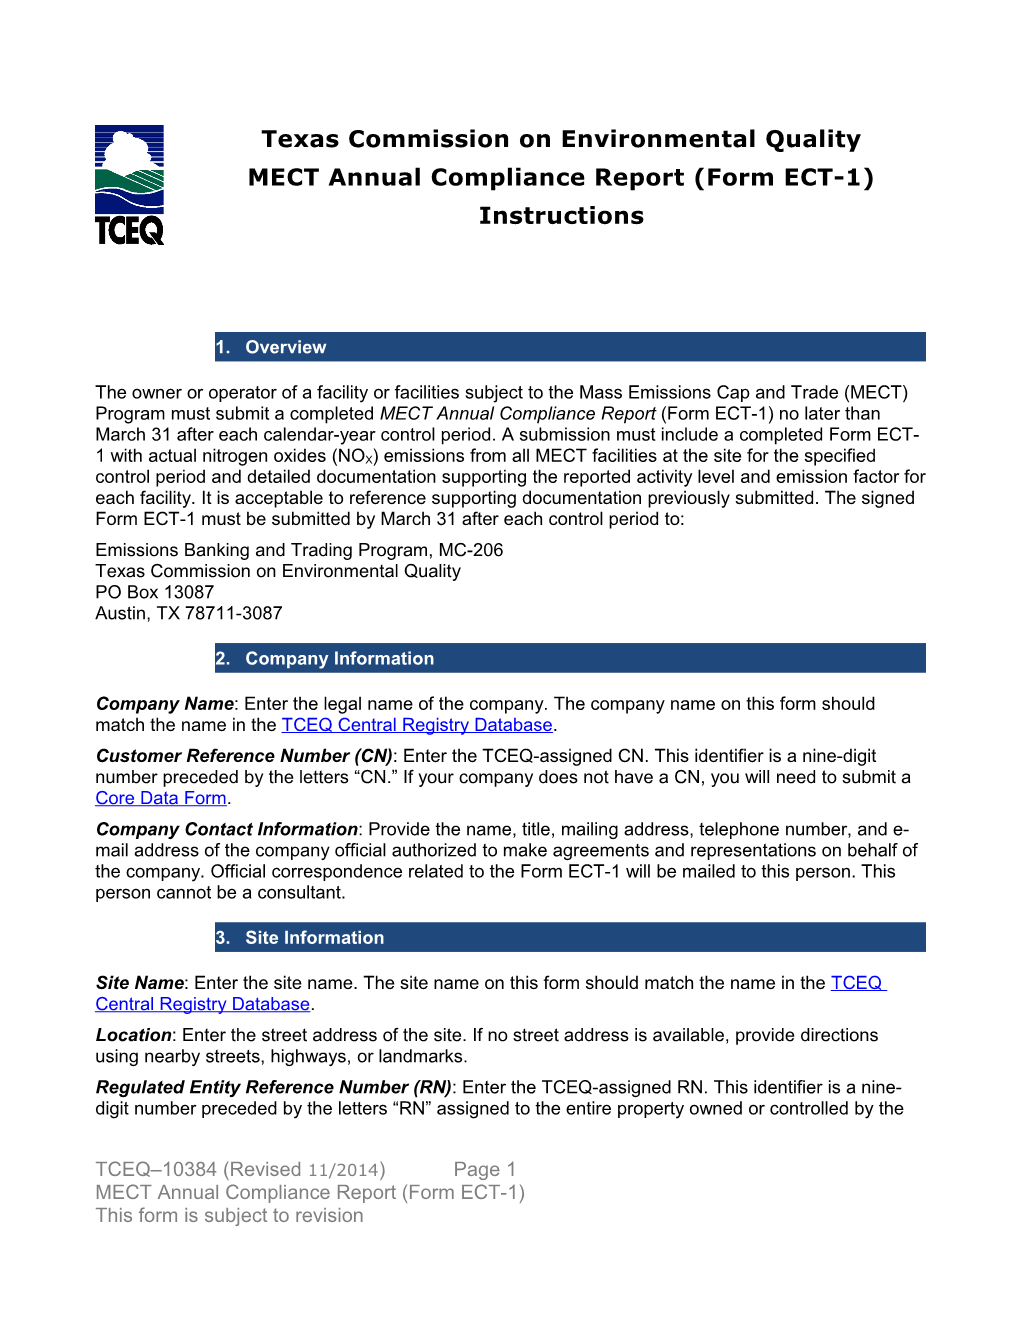 MECT Annual Compliance Report (Form ECT-1)